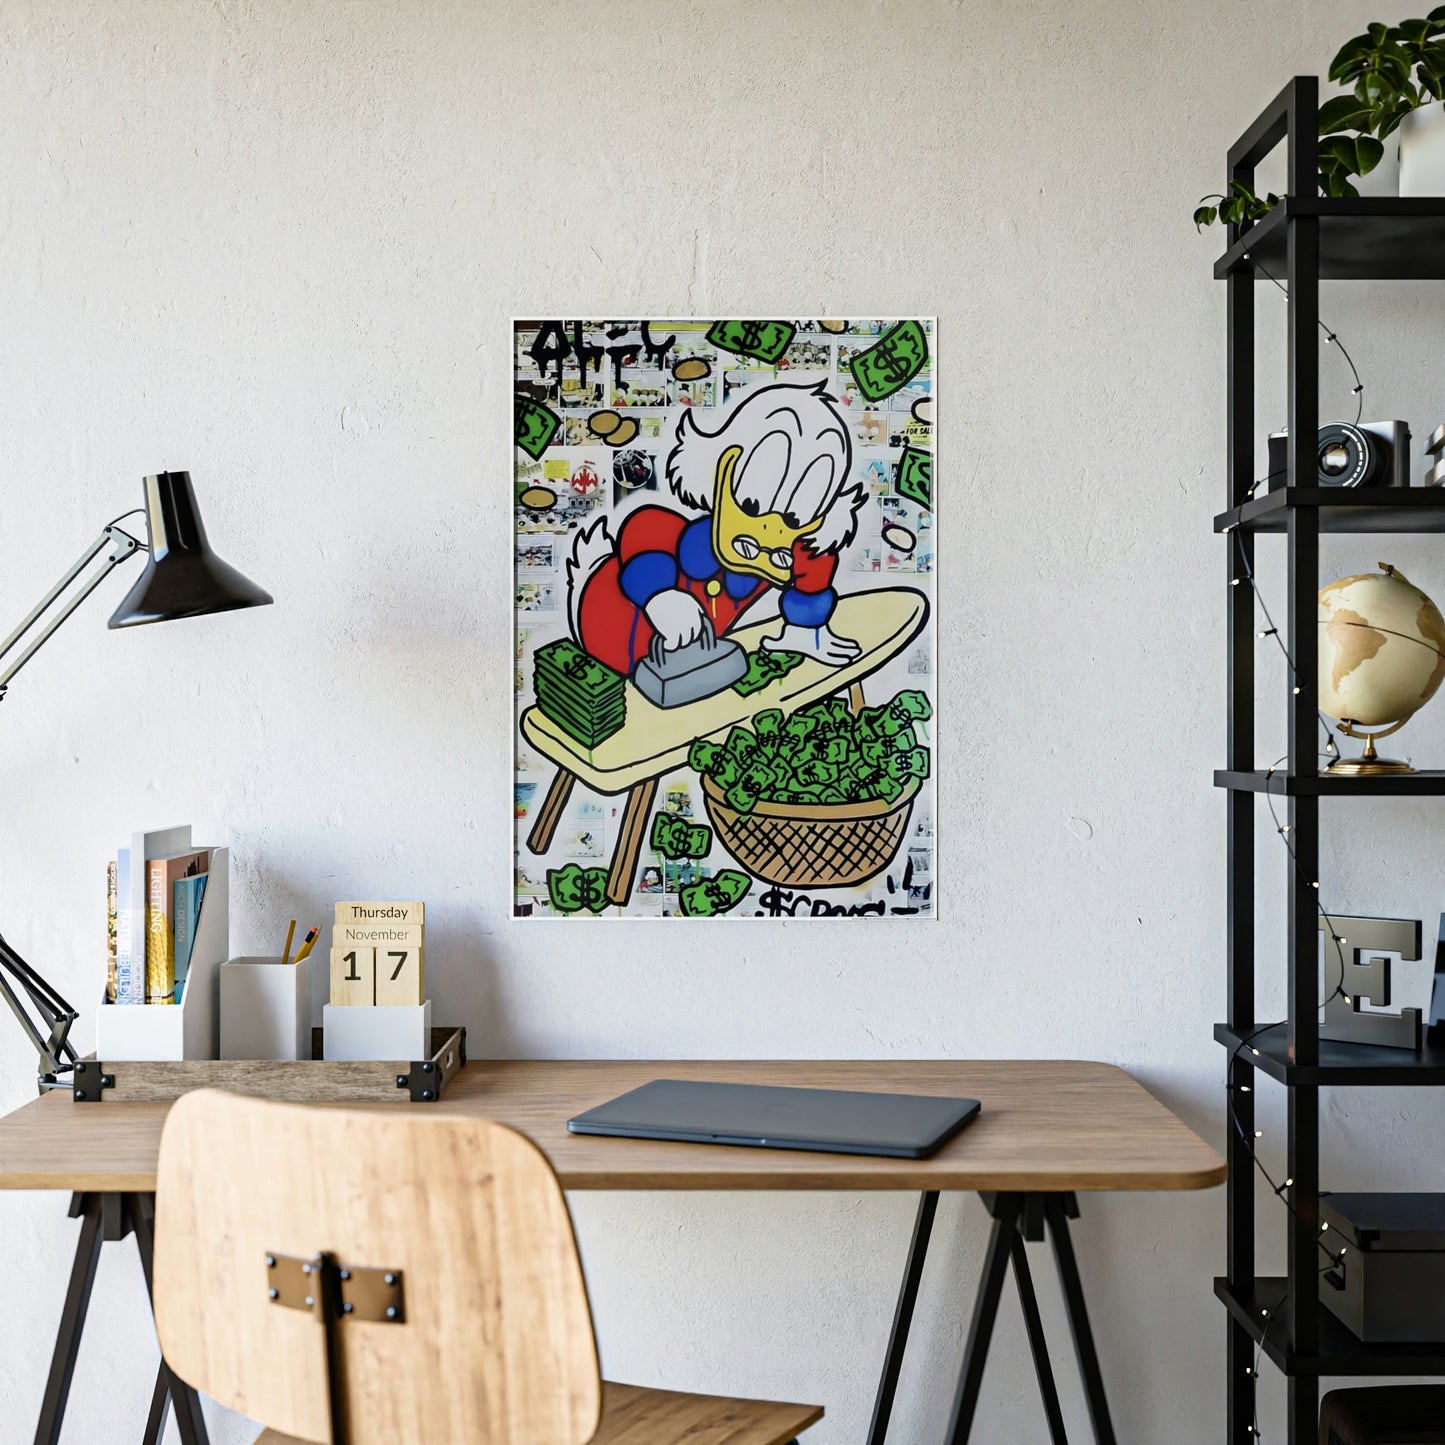 The Money Duck: Wall Art Prints of a Duck in Alec Monopoly's Iconic Money-Themed Graffiti Style on Framed Canvas